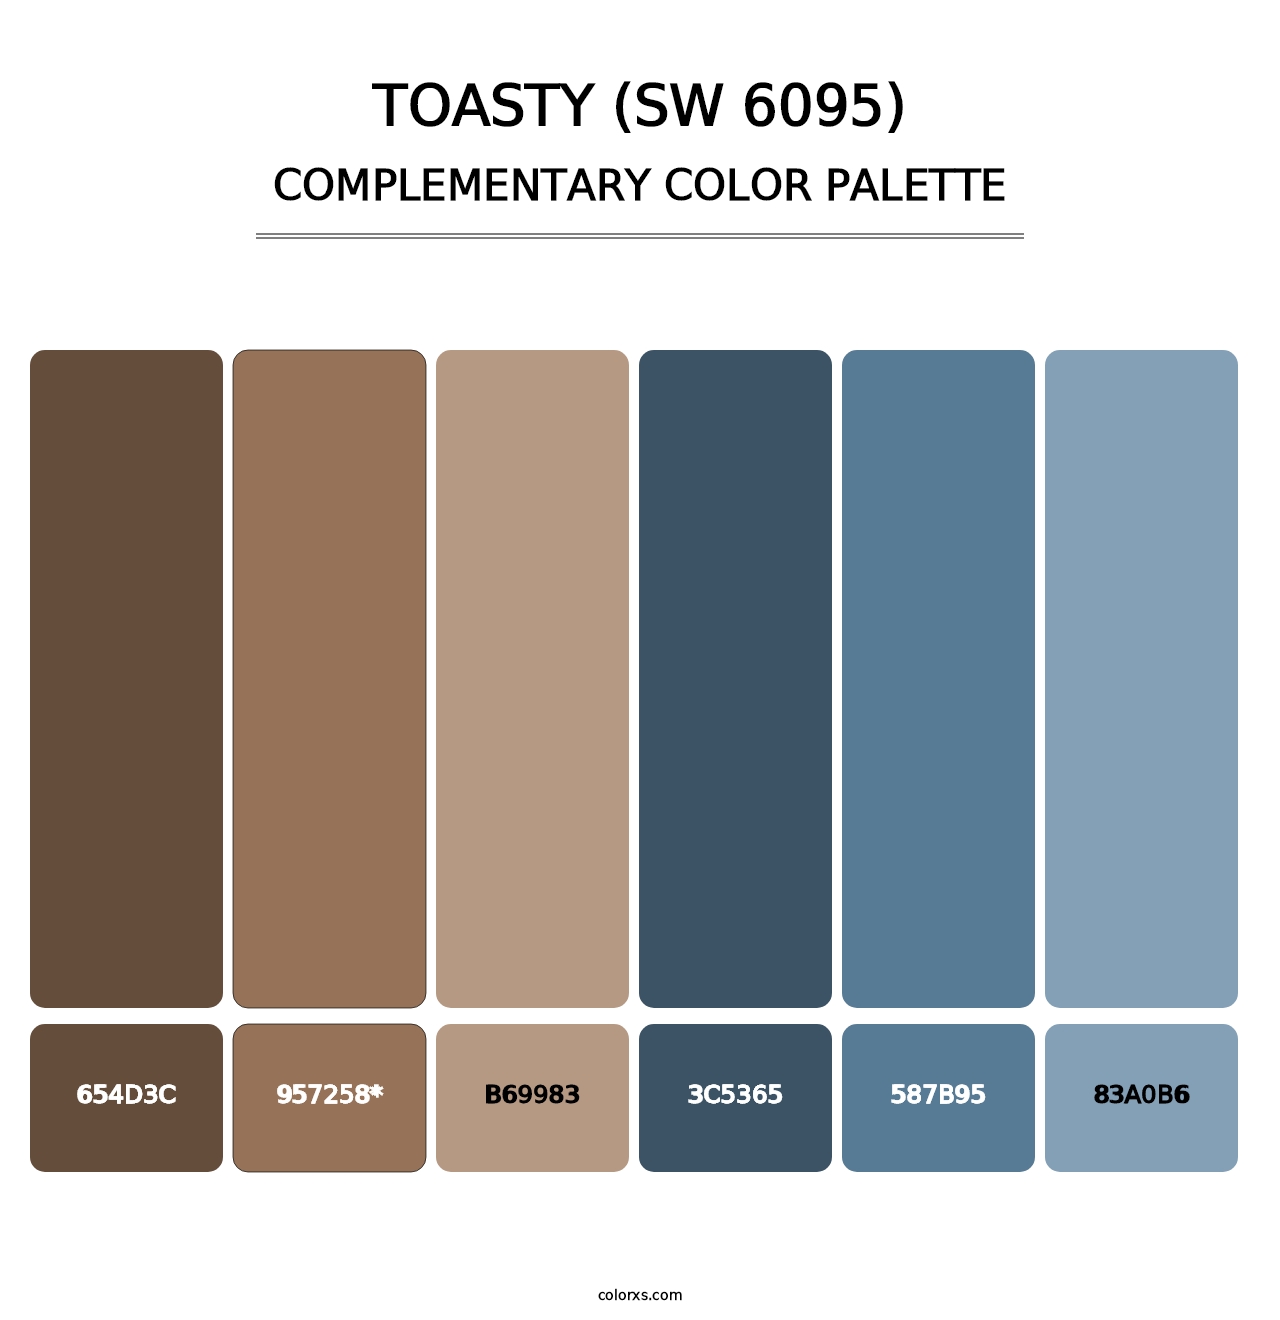 Toasty (SW 6095) - Complementary Color Palette